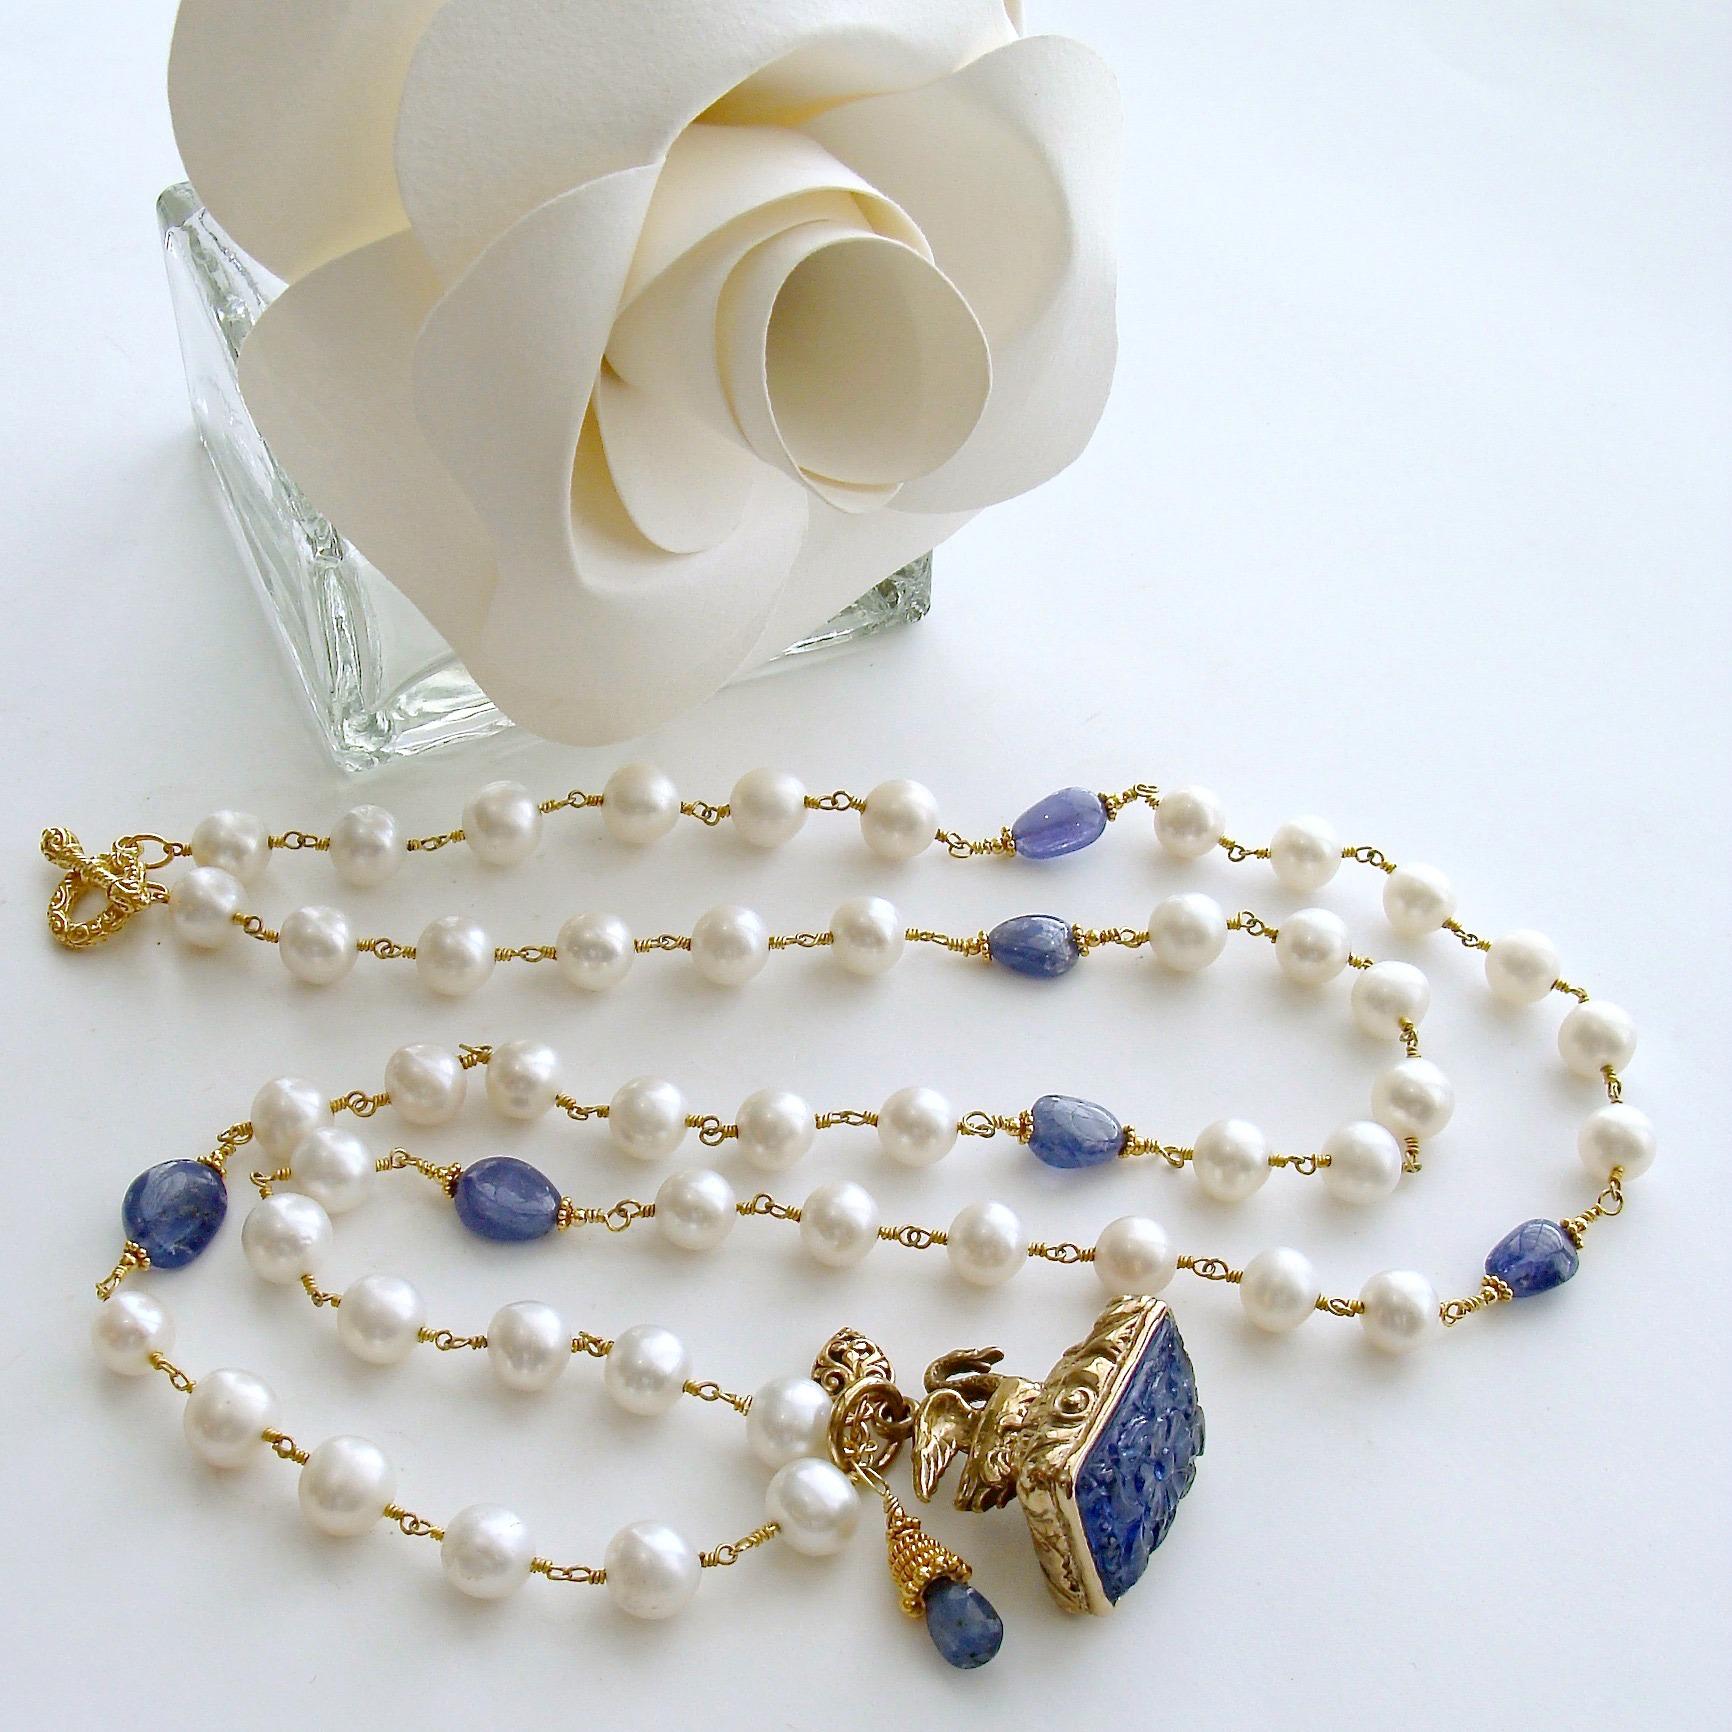 Étaín II Necklace.

A luxe hand-linked chain of creamy freshwater pearls is intercepted with smooth, deep periwinkle colored tanzanite nuggets, stationed along the chain.  The focal point of this necklace is a faithfully reproduced Georgian swan